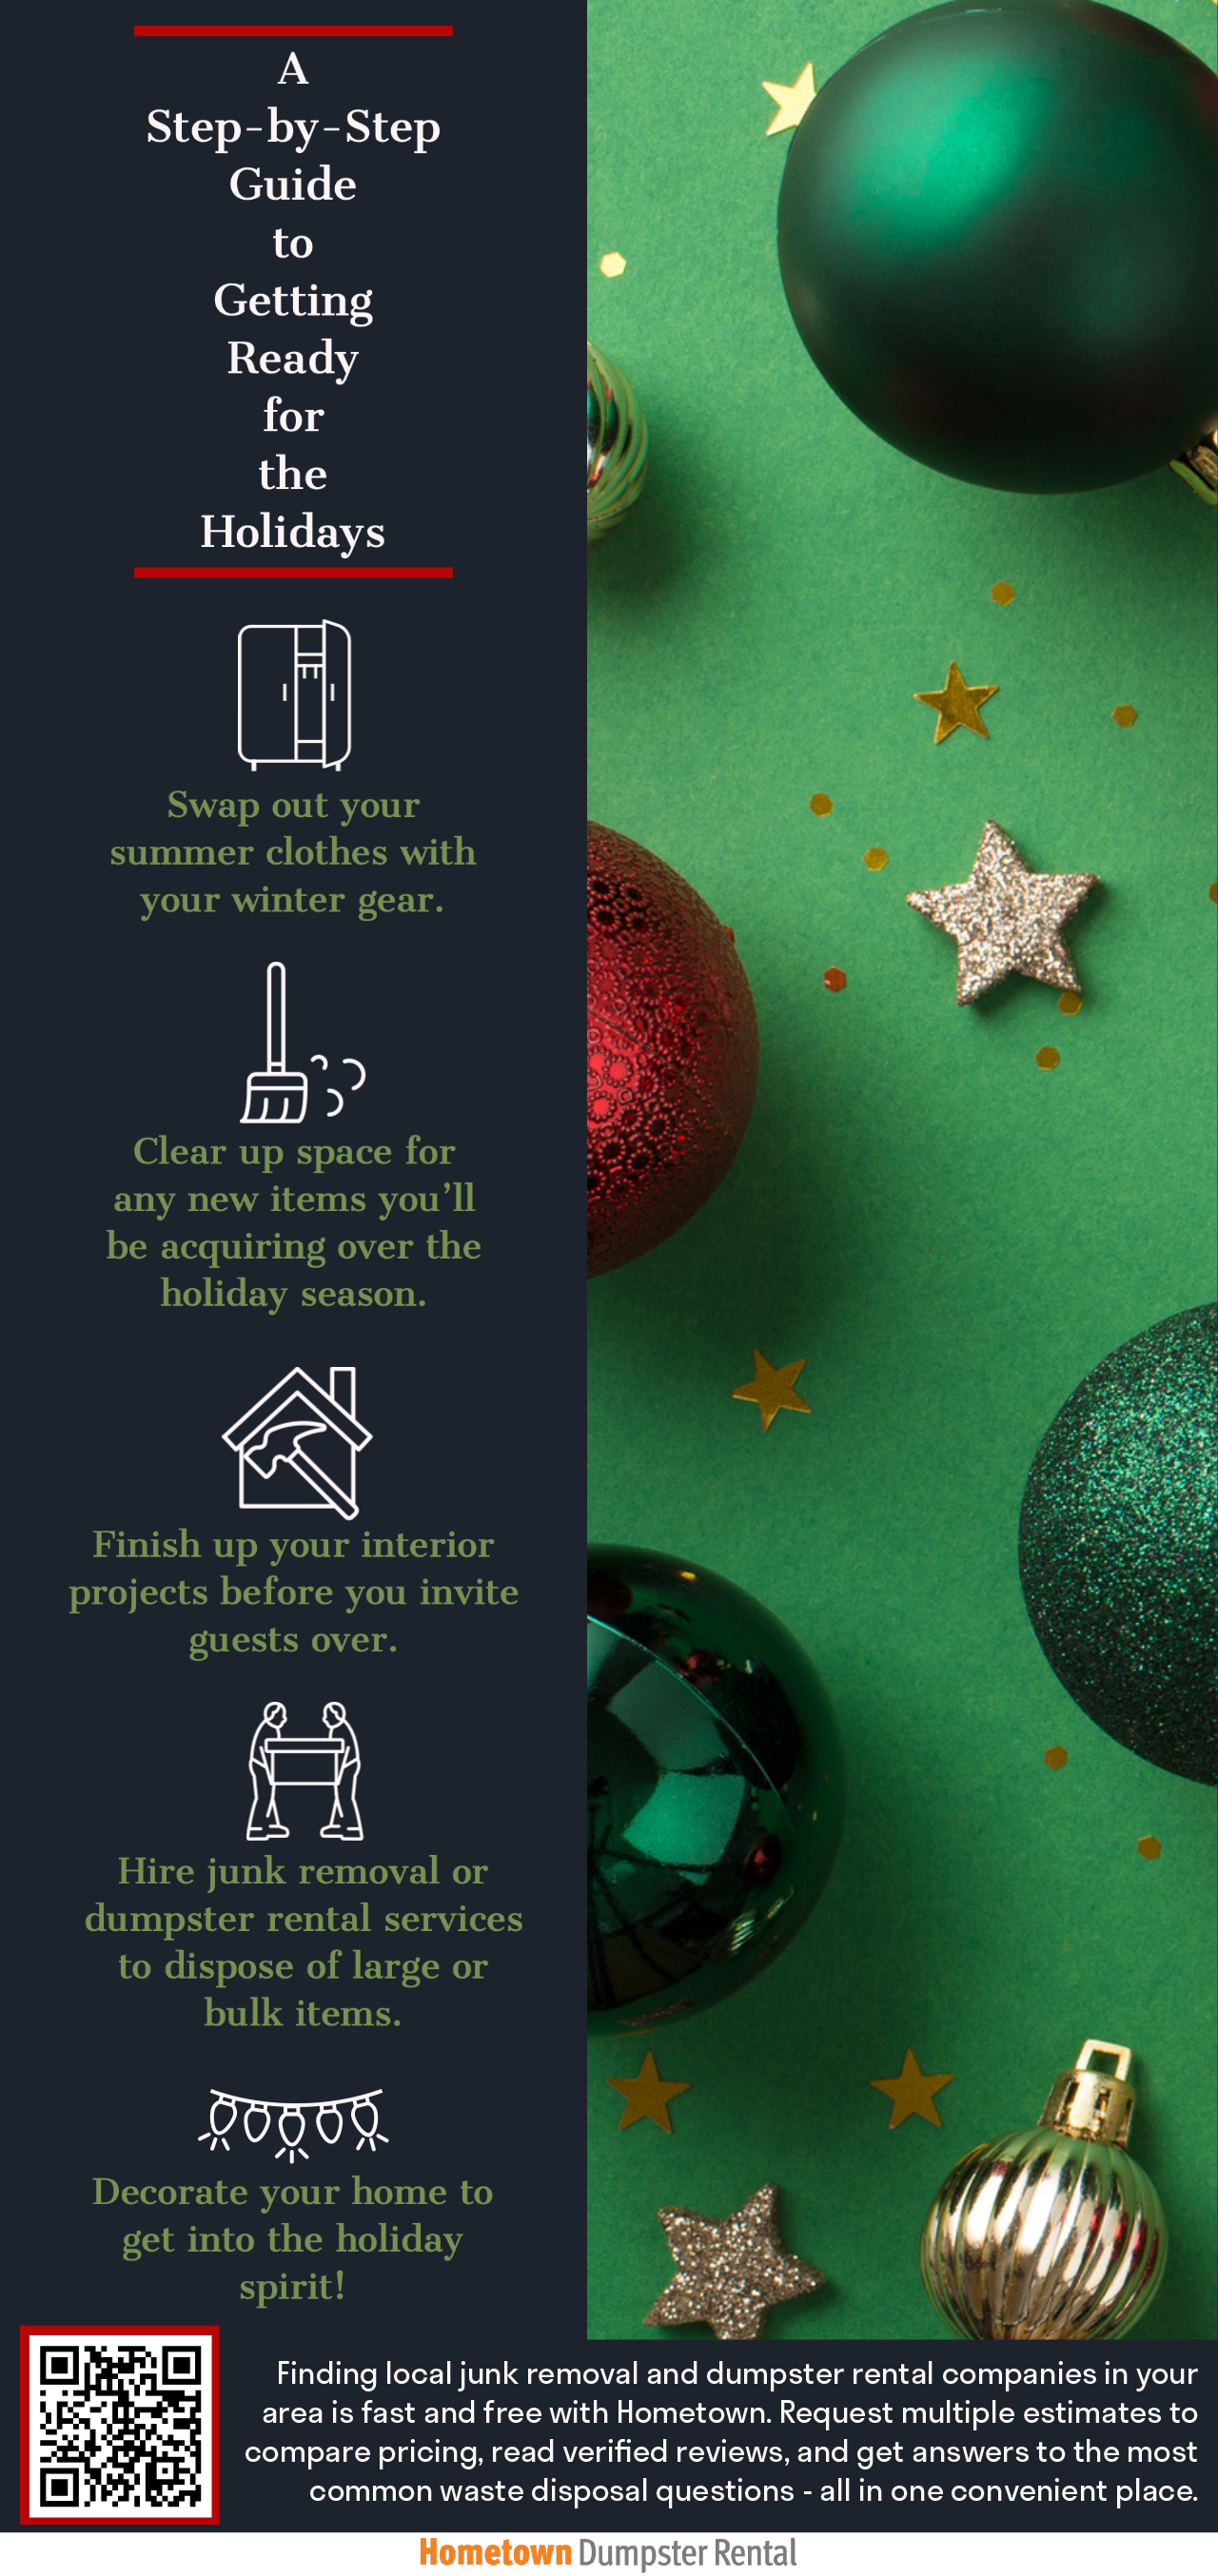 A Step-by-Step Guide to Getting Ready for the Holidays Infographic